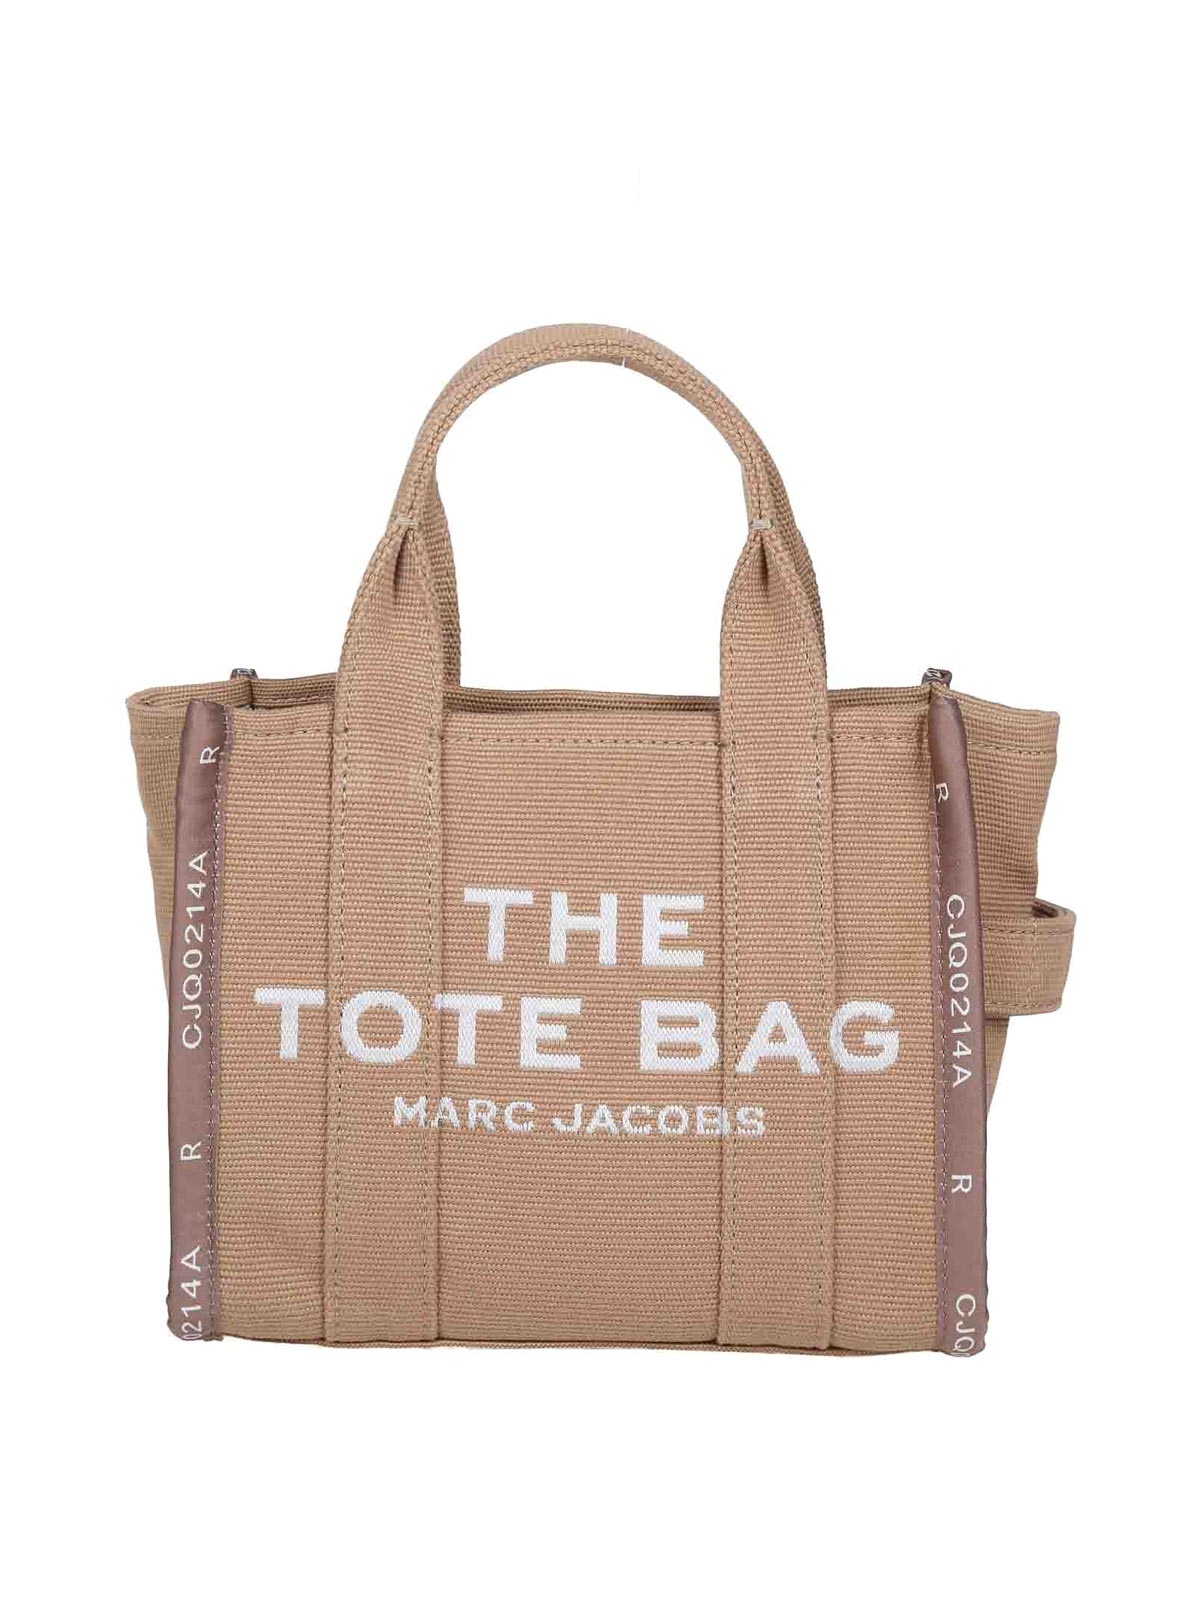 Thoughts on this Marc jacobs tote? : r/handbags